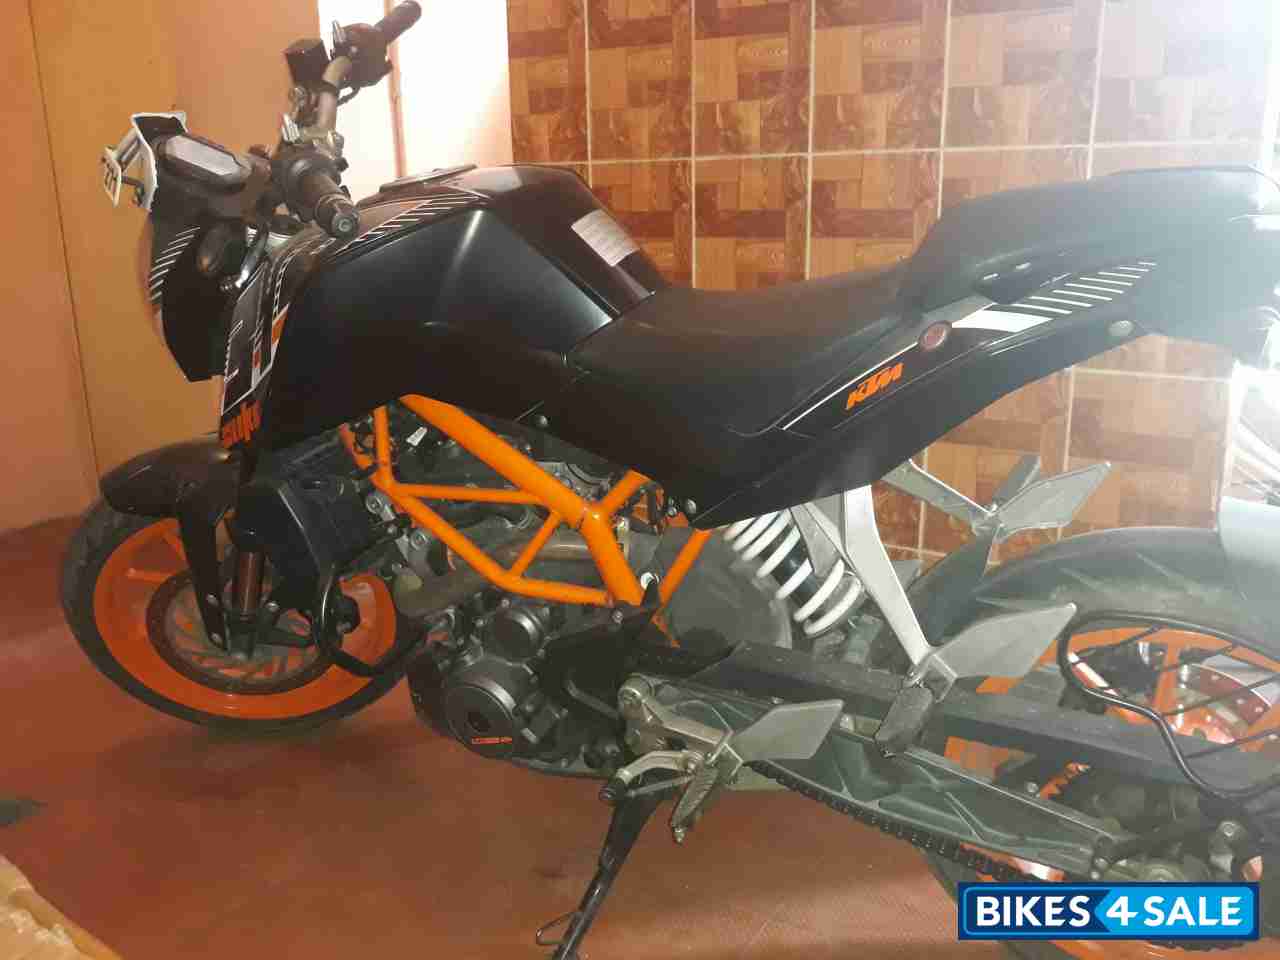 Used 2016 model KTM Duke 390 for sale in Bangalore. ID ...